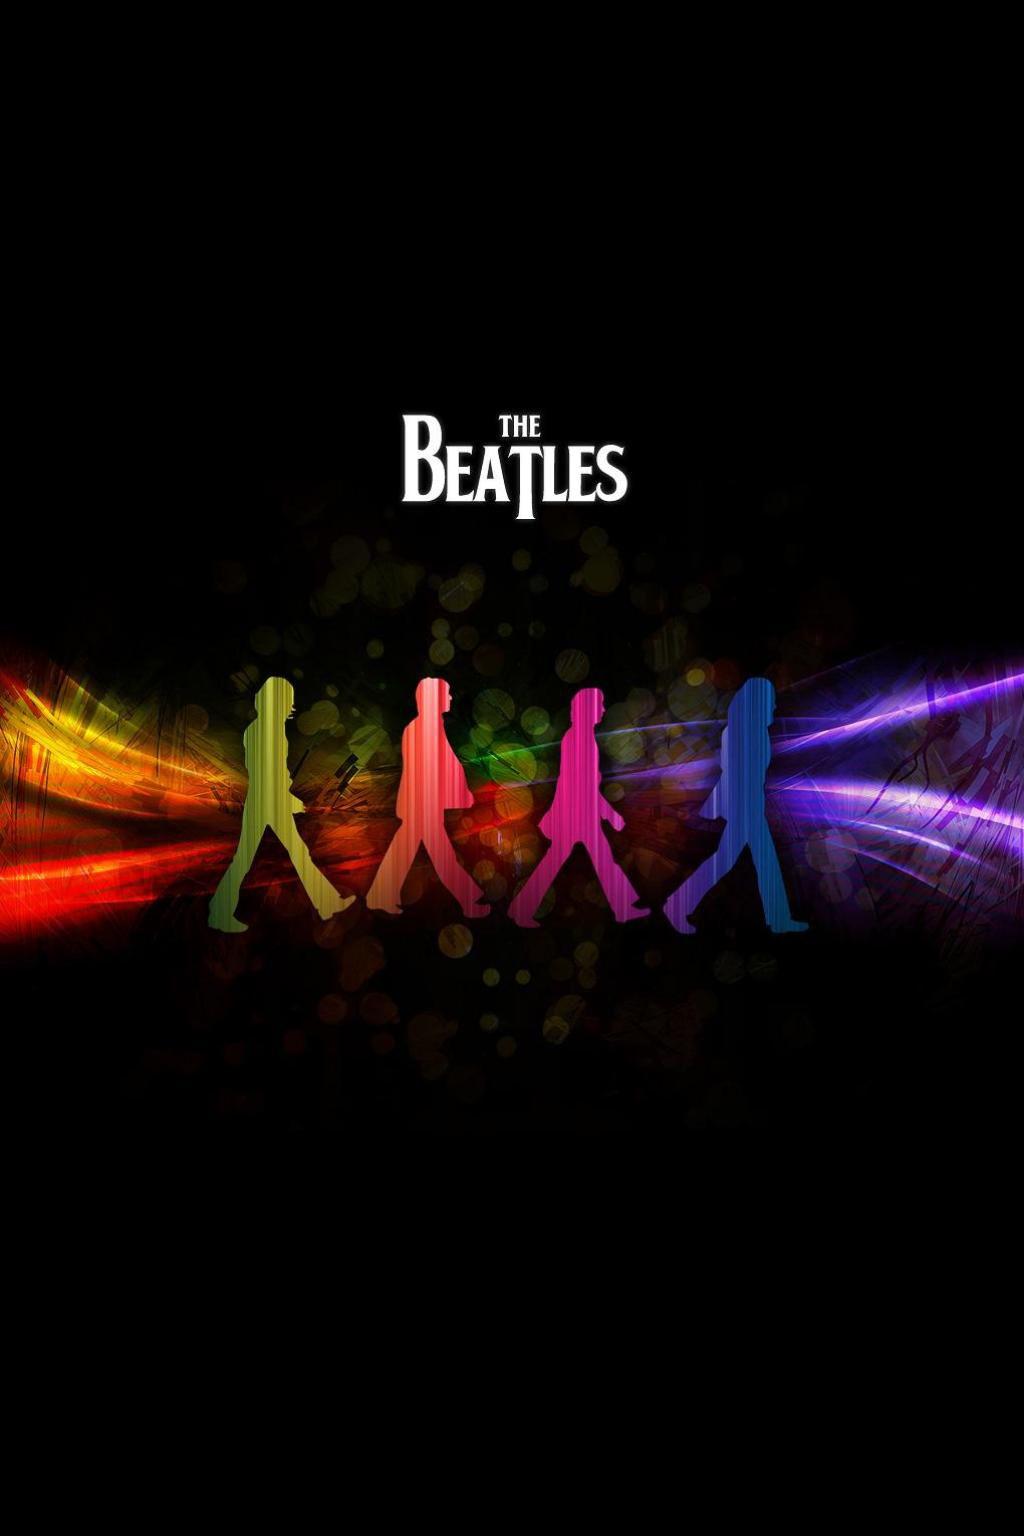 The Beatles Android Wallpapers Wallpaper Cave